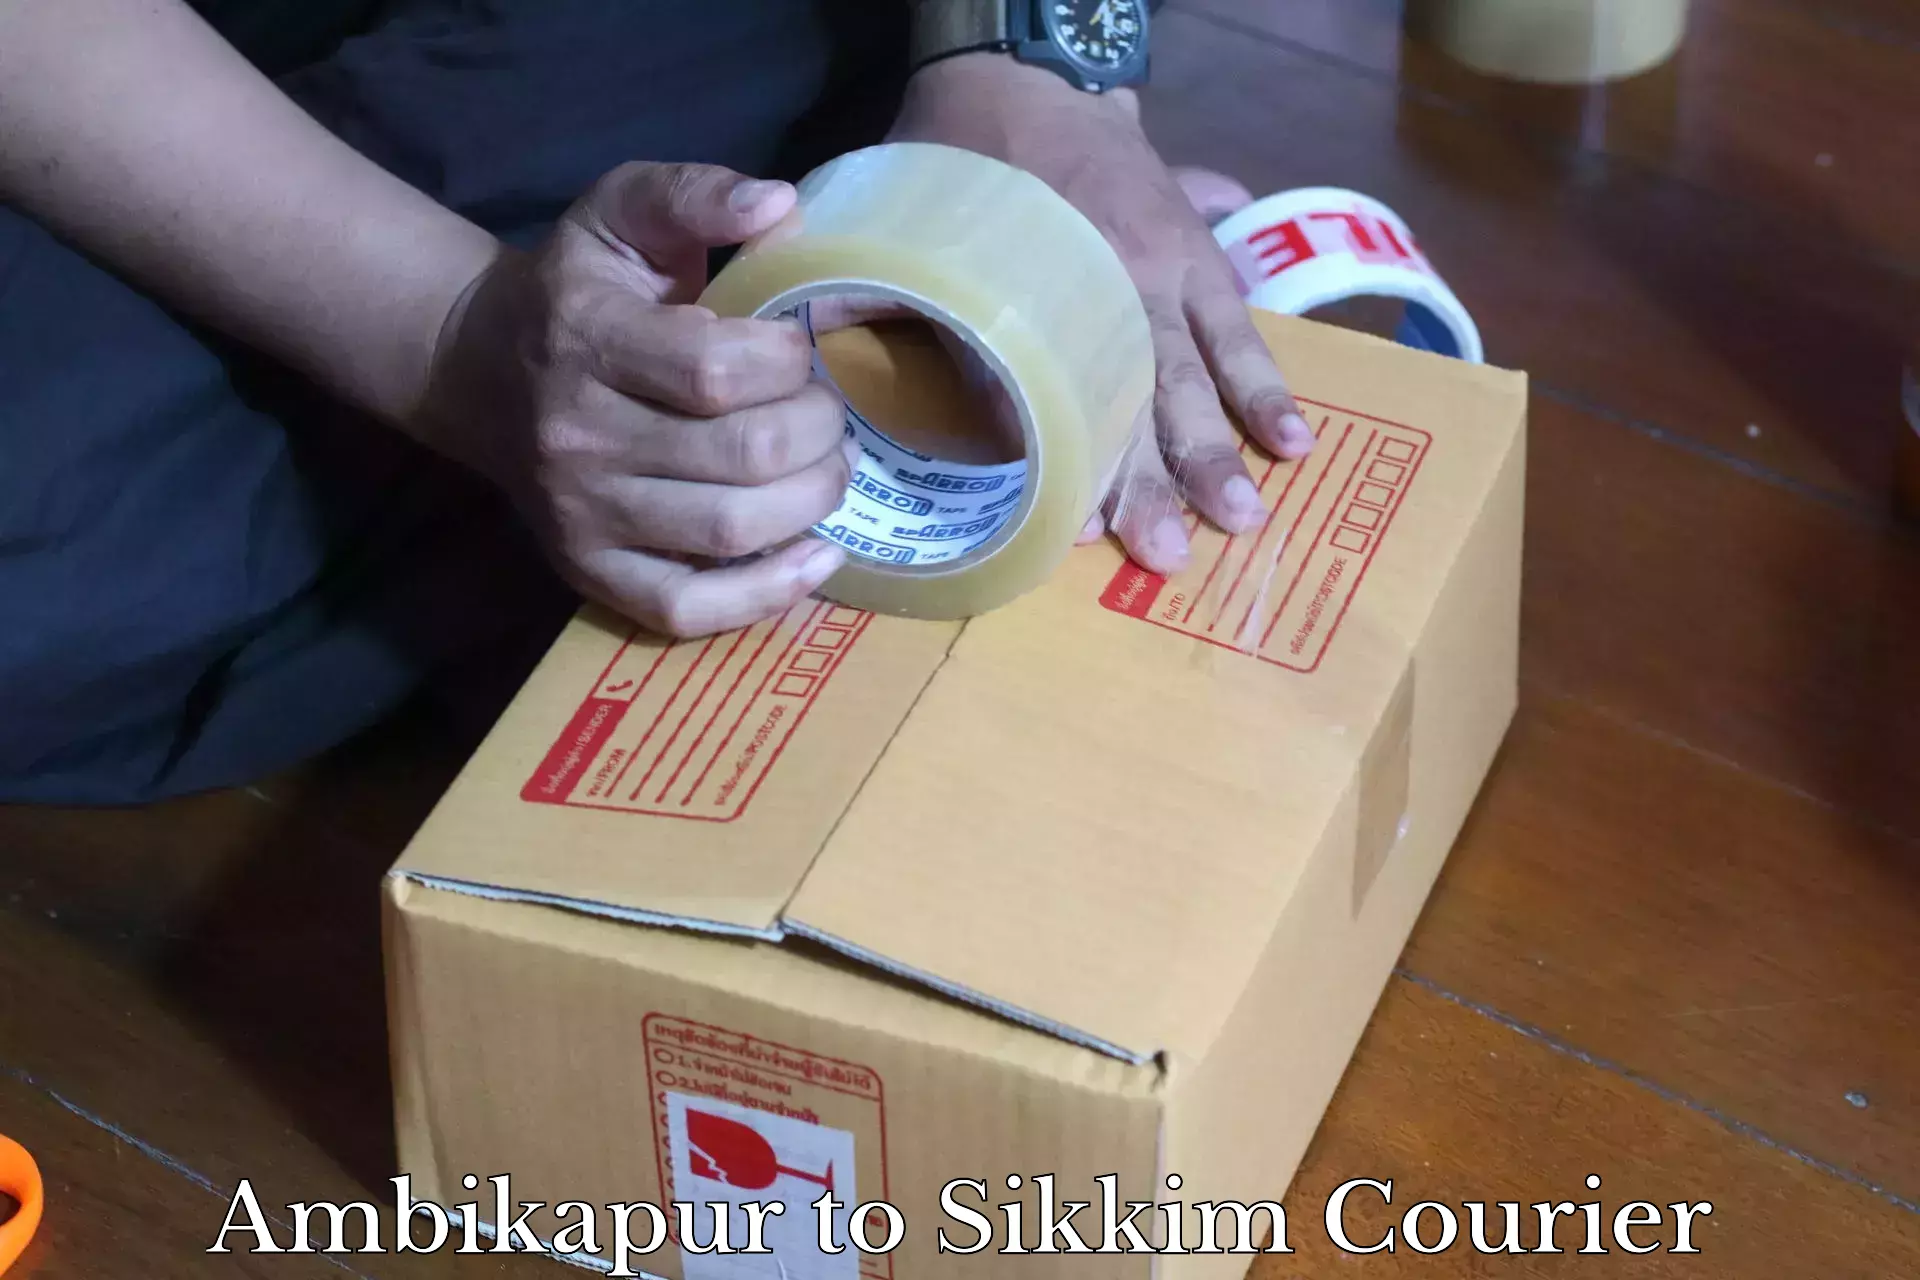 Next-generation courier services Ambikapur to East Sikkim